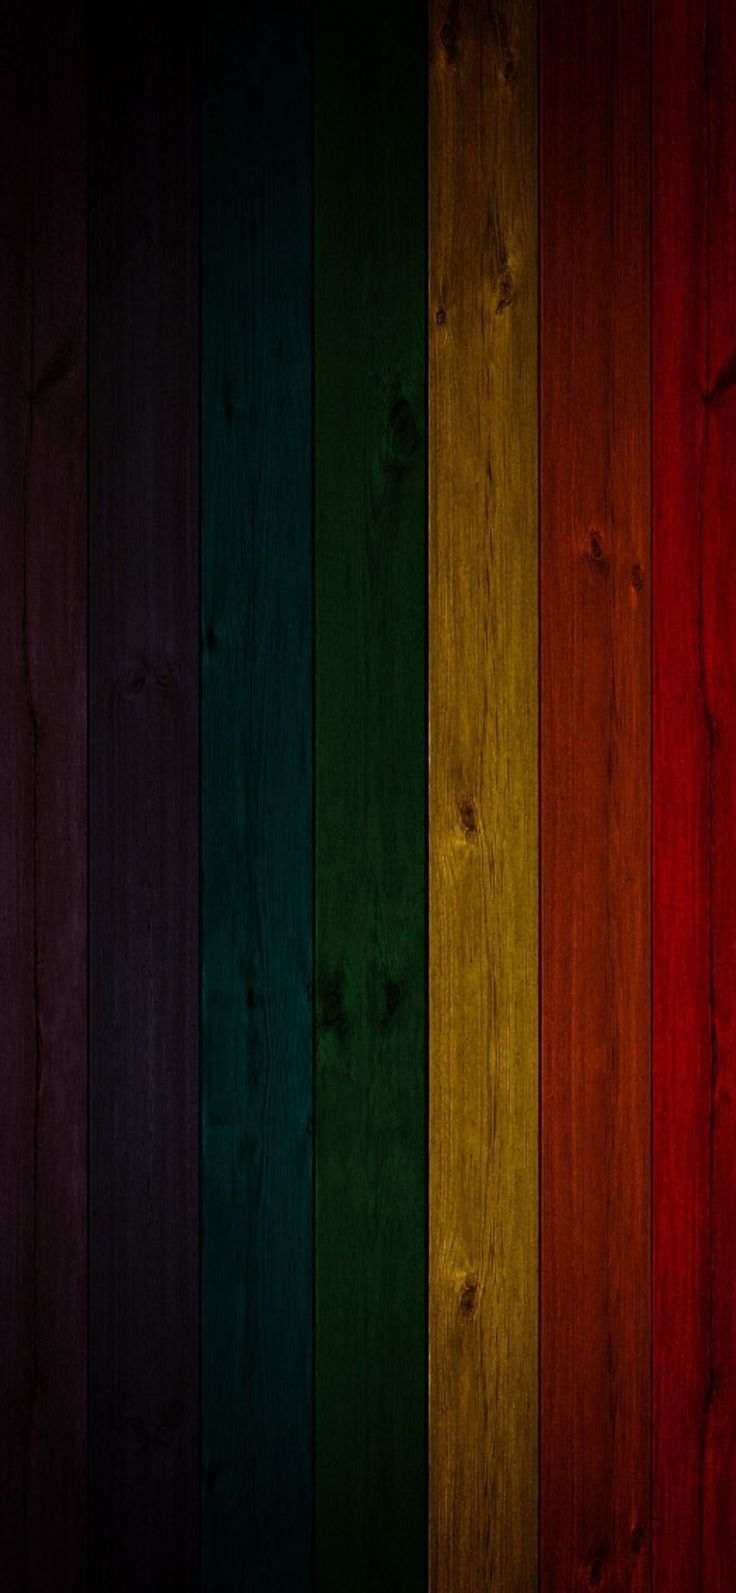 Colorful wood textures background iPhone Wallpaper. Textured background, Wood texture background, Wood texture